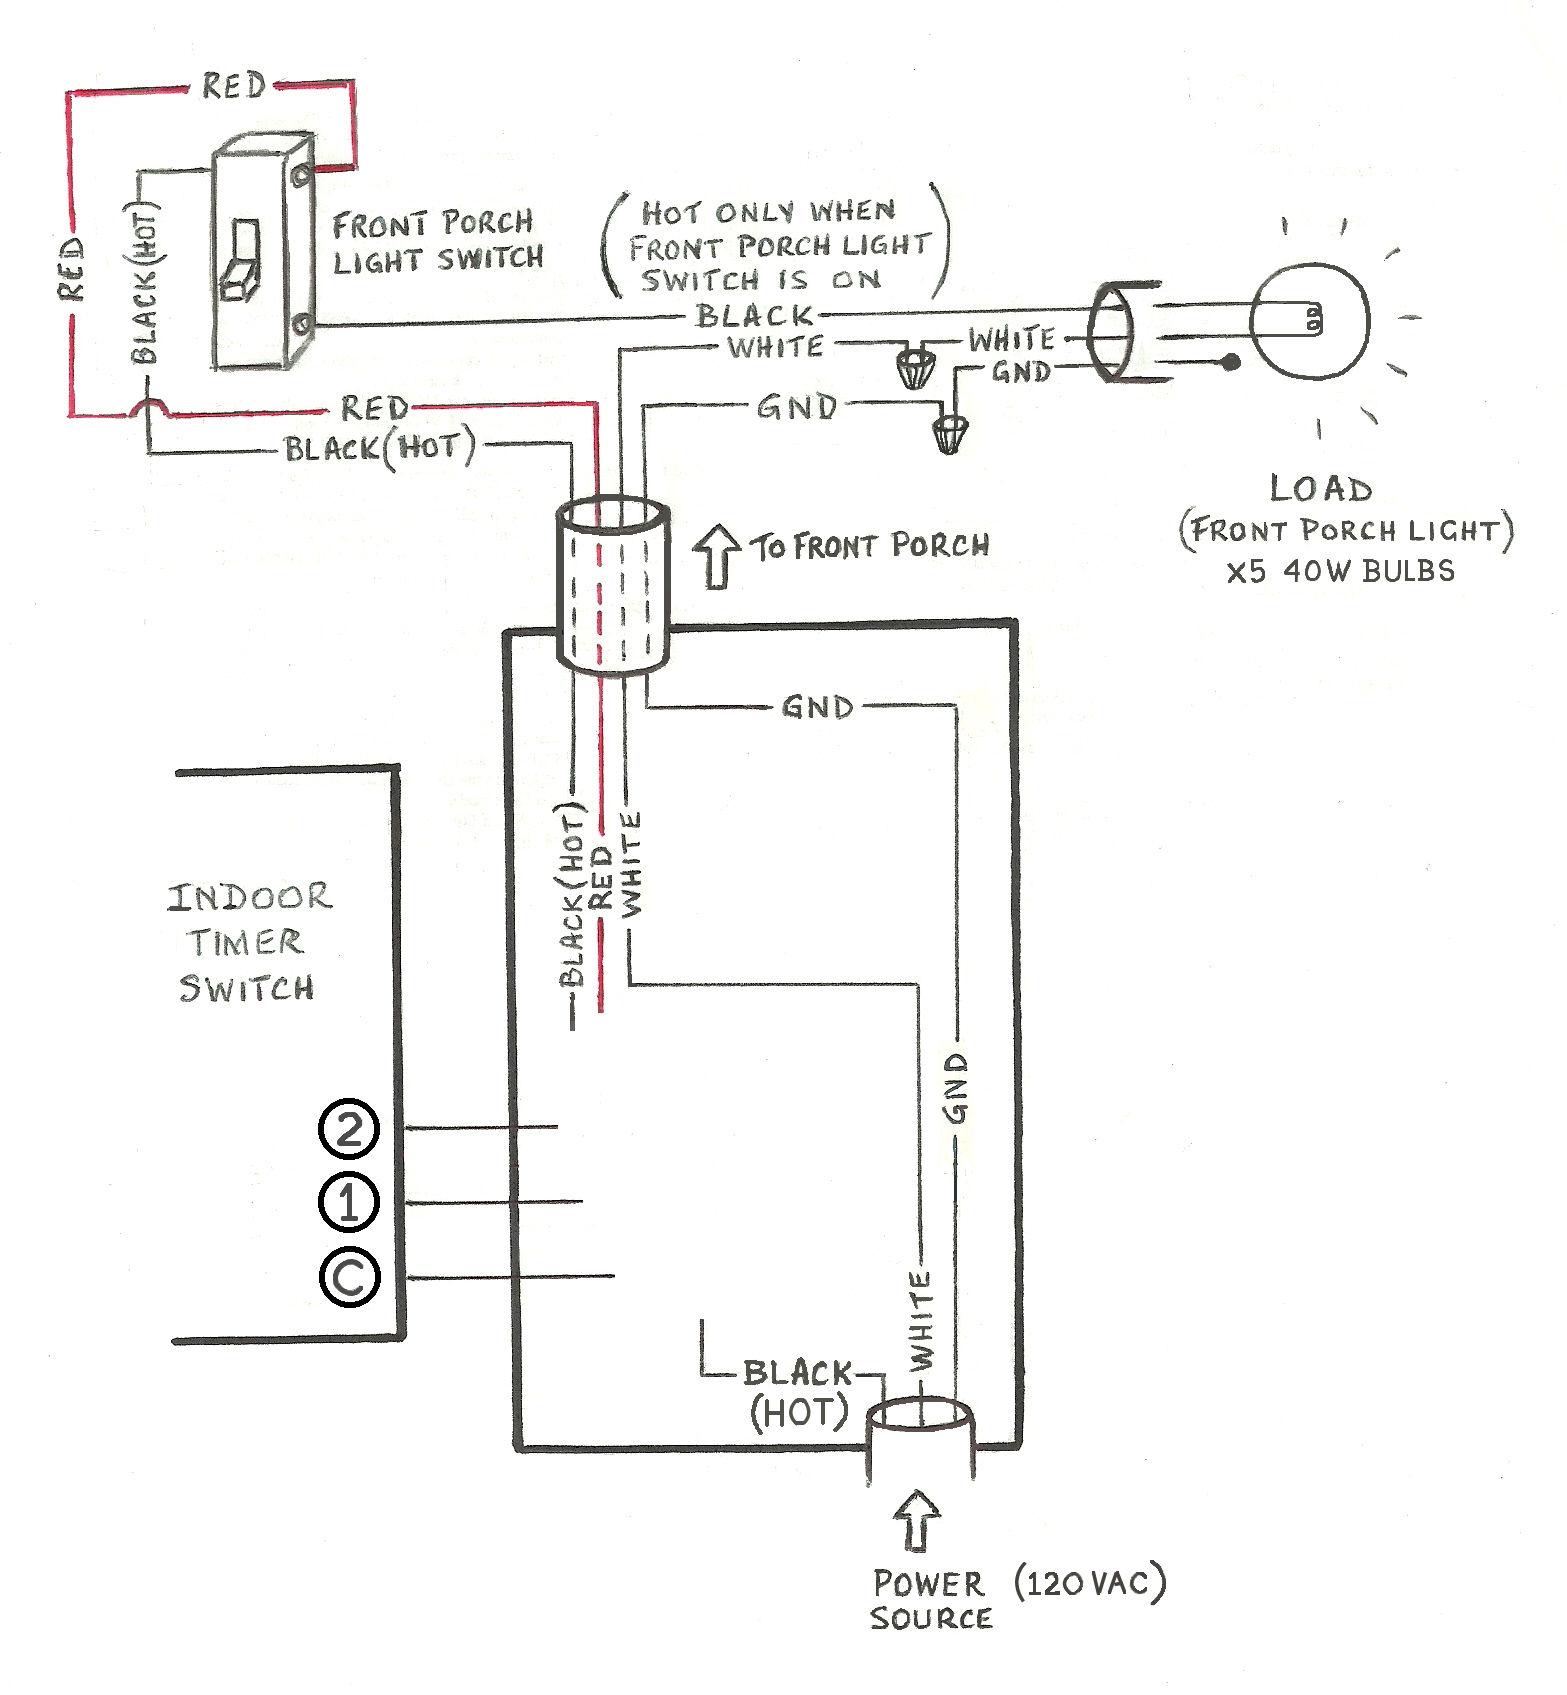 Need Help Wiring A 3-Way Honeywell Digital Timer Switch - Home - Wiring Diagram Light Switches